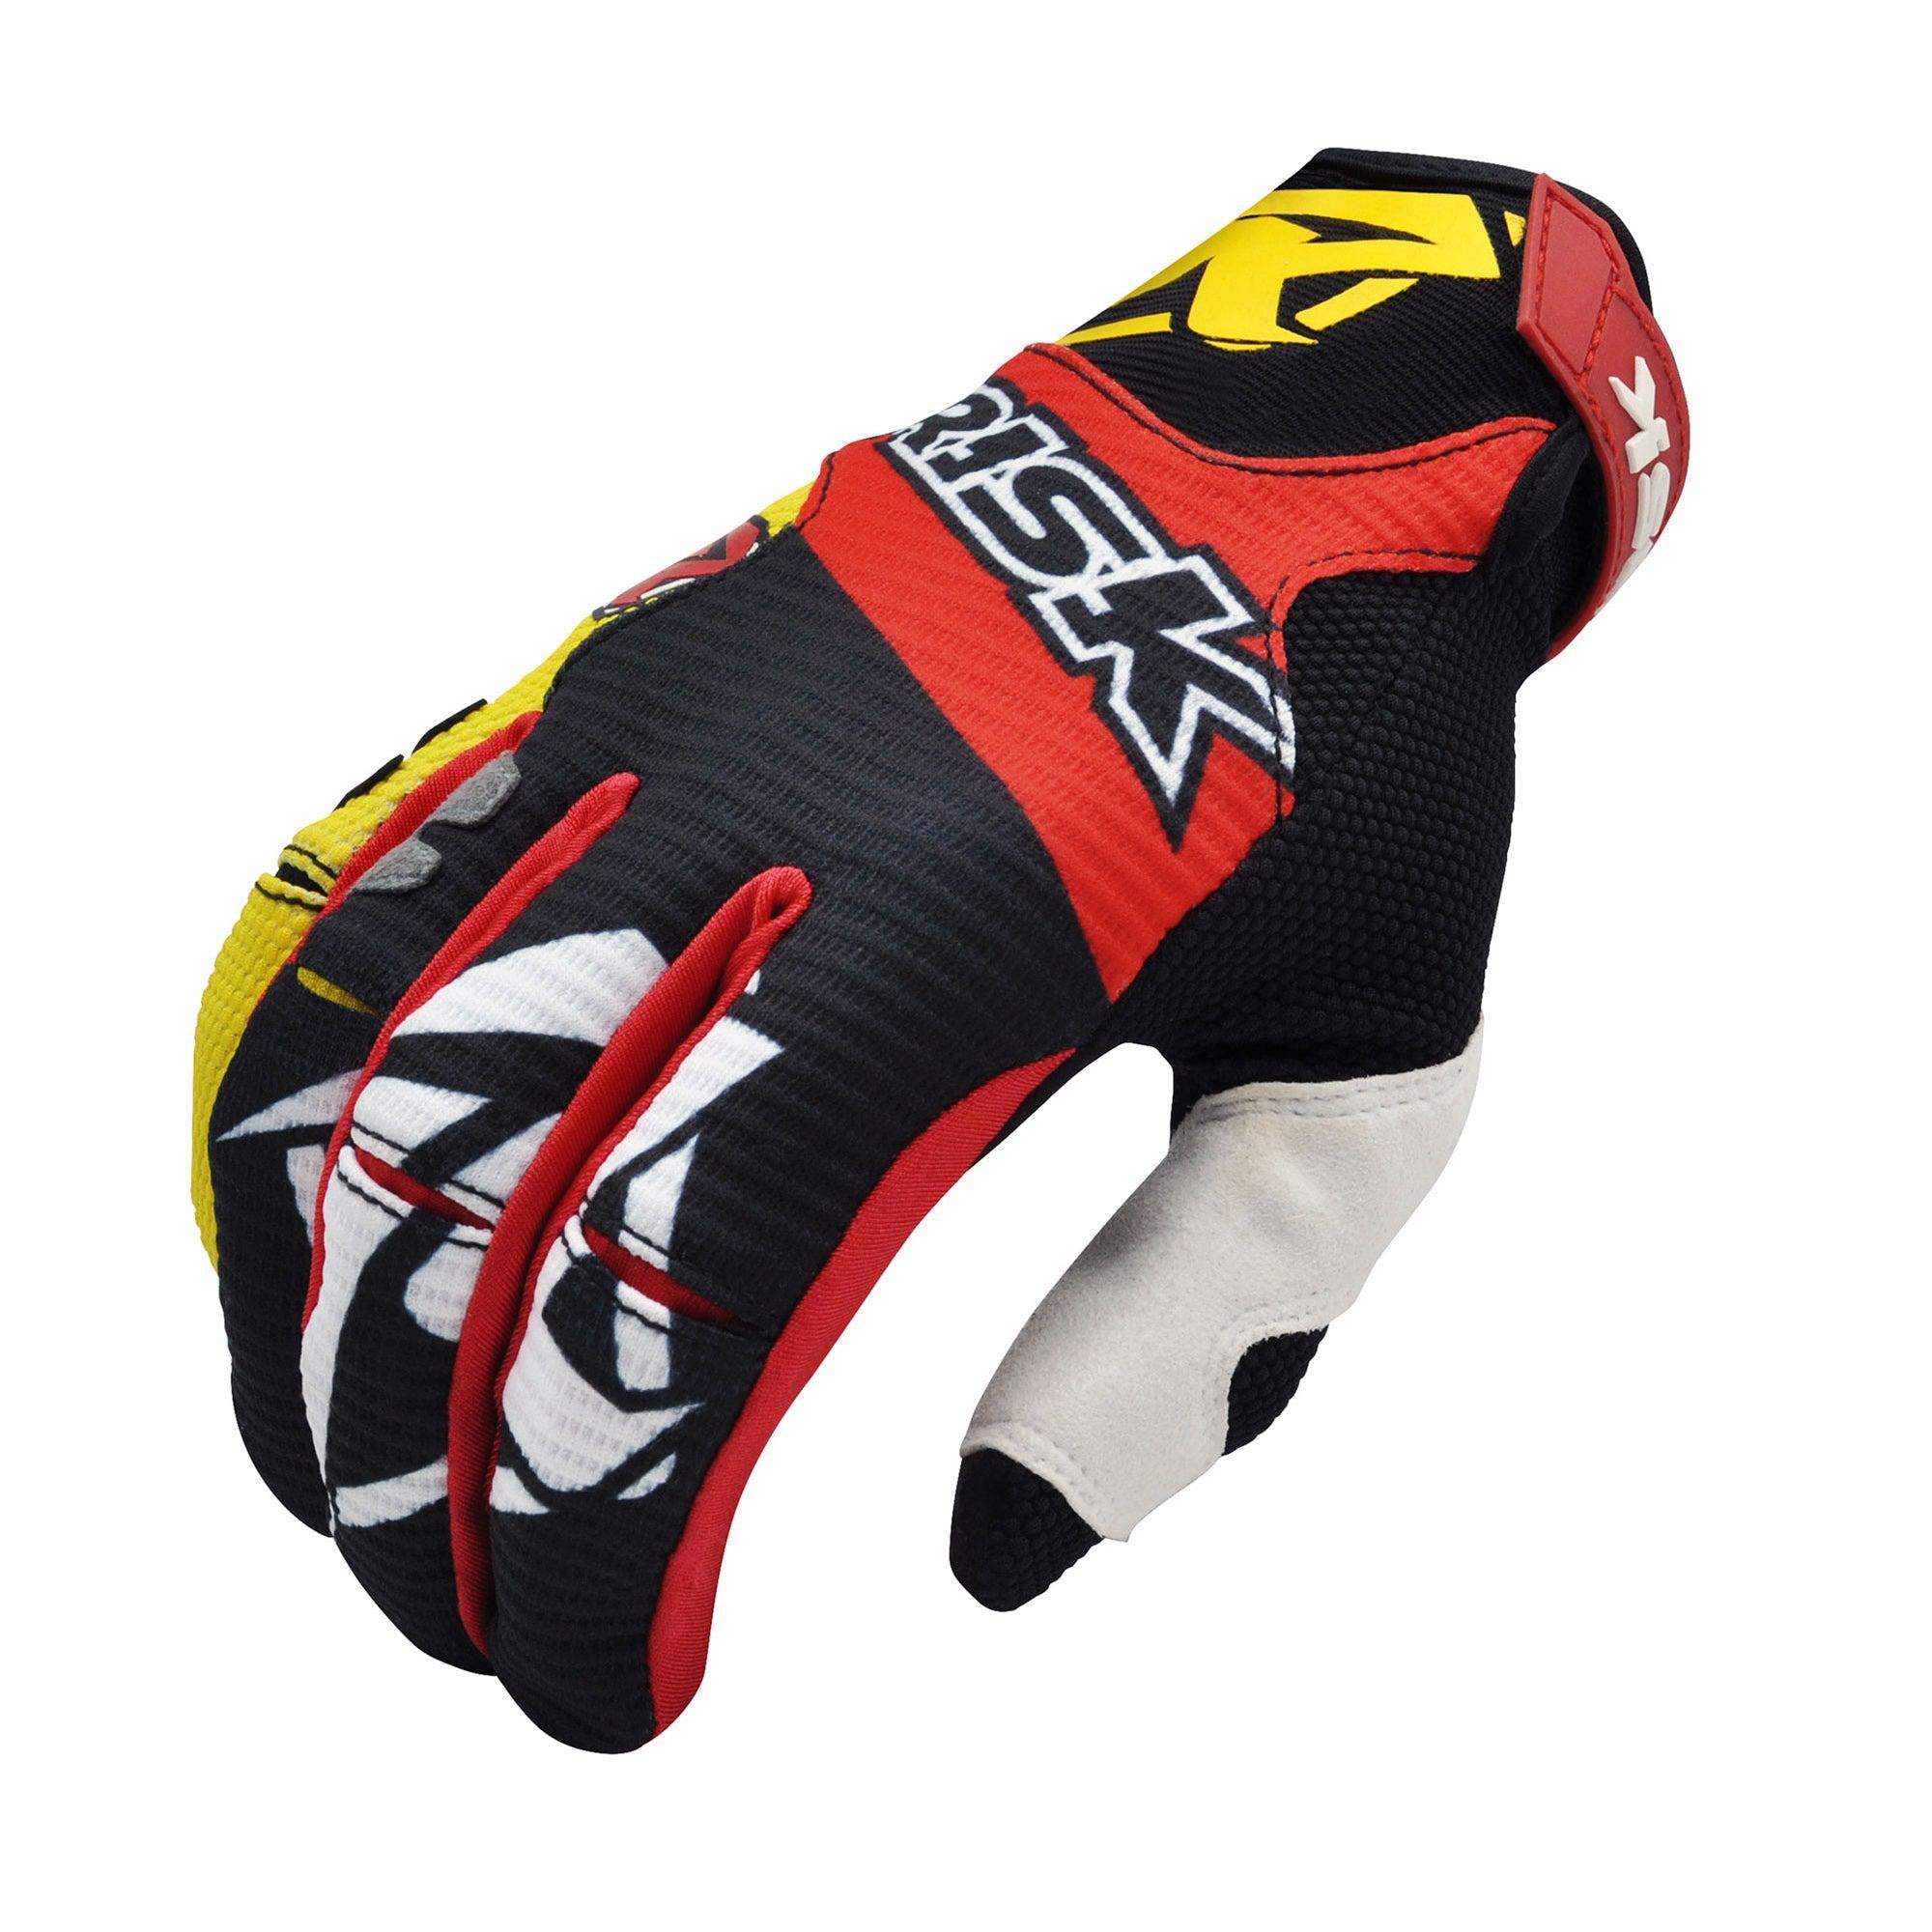 VENTilate V2 Moto Gloves - Yellow/Red